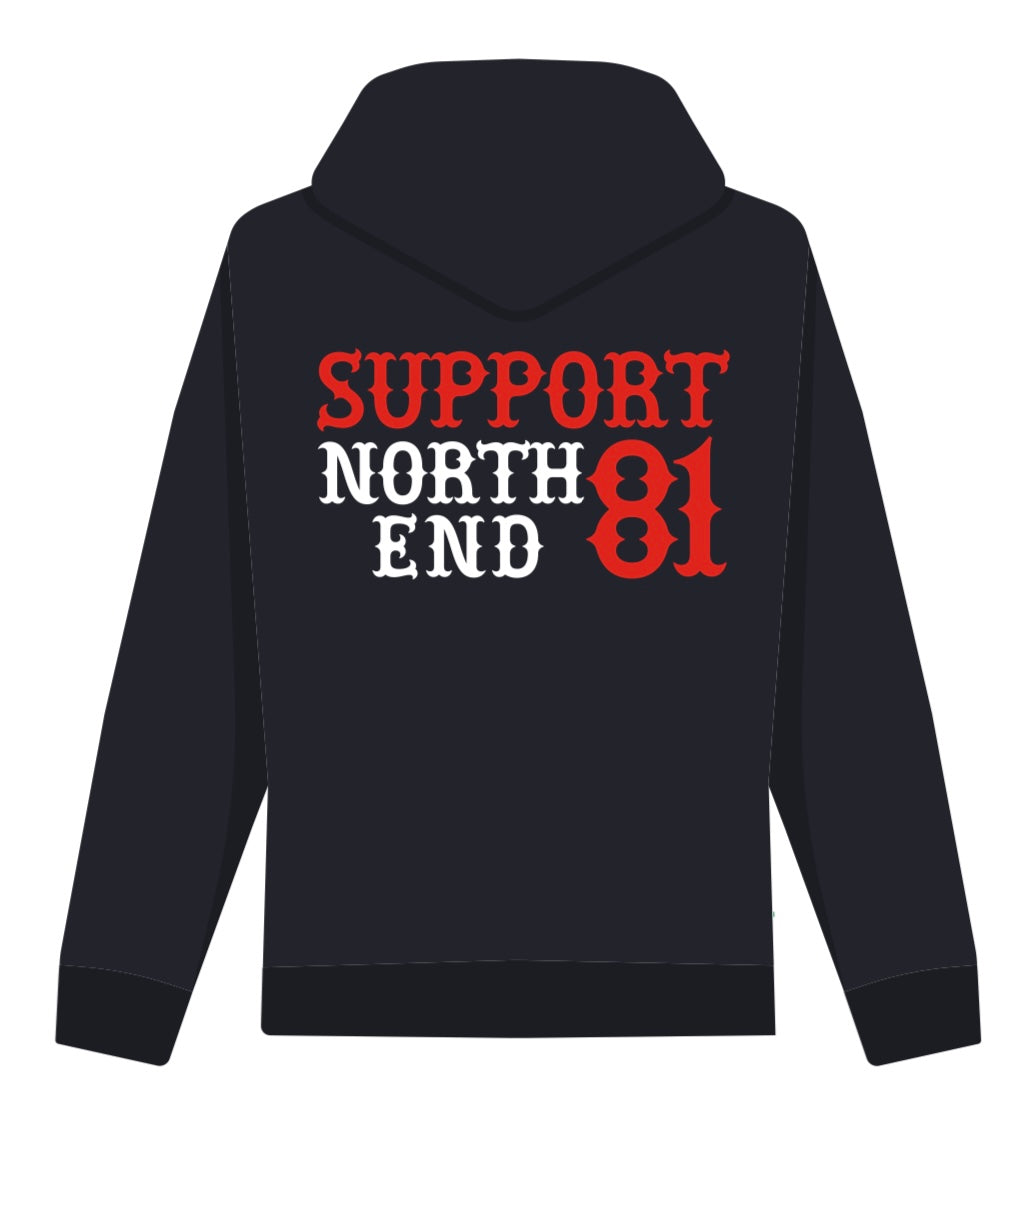 Hoodie LETTER 81 NORTH END